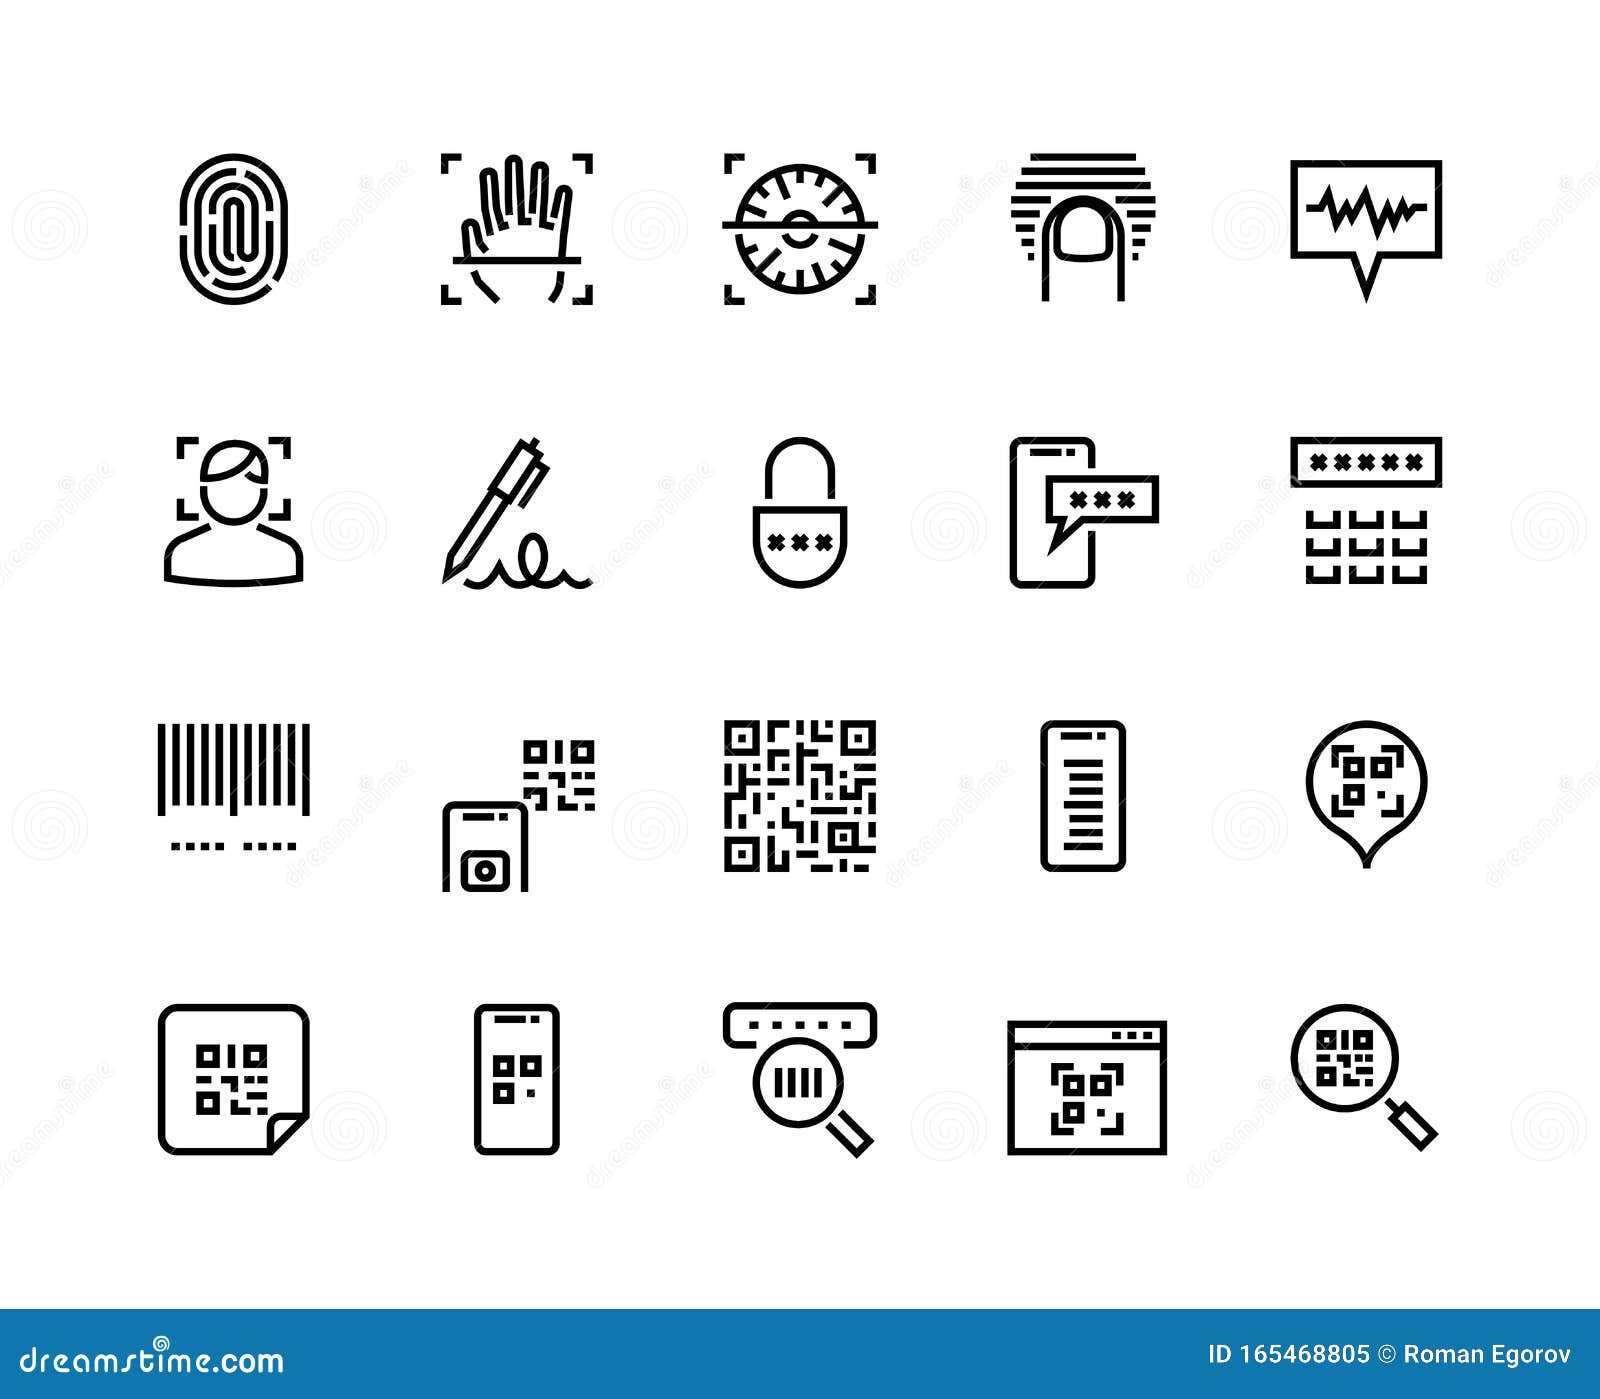 identification line icons. biometric sensor, face recognition and fingerprint scanner icons.  authentication and